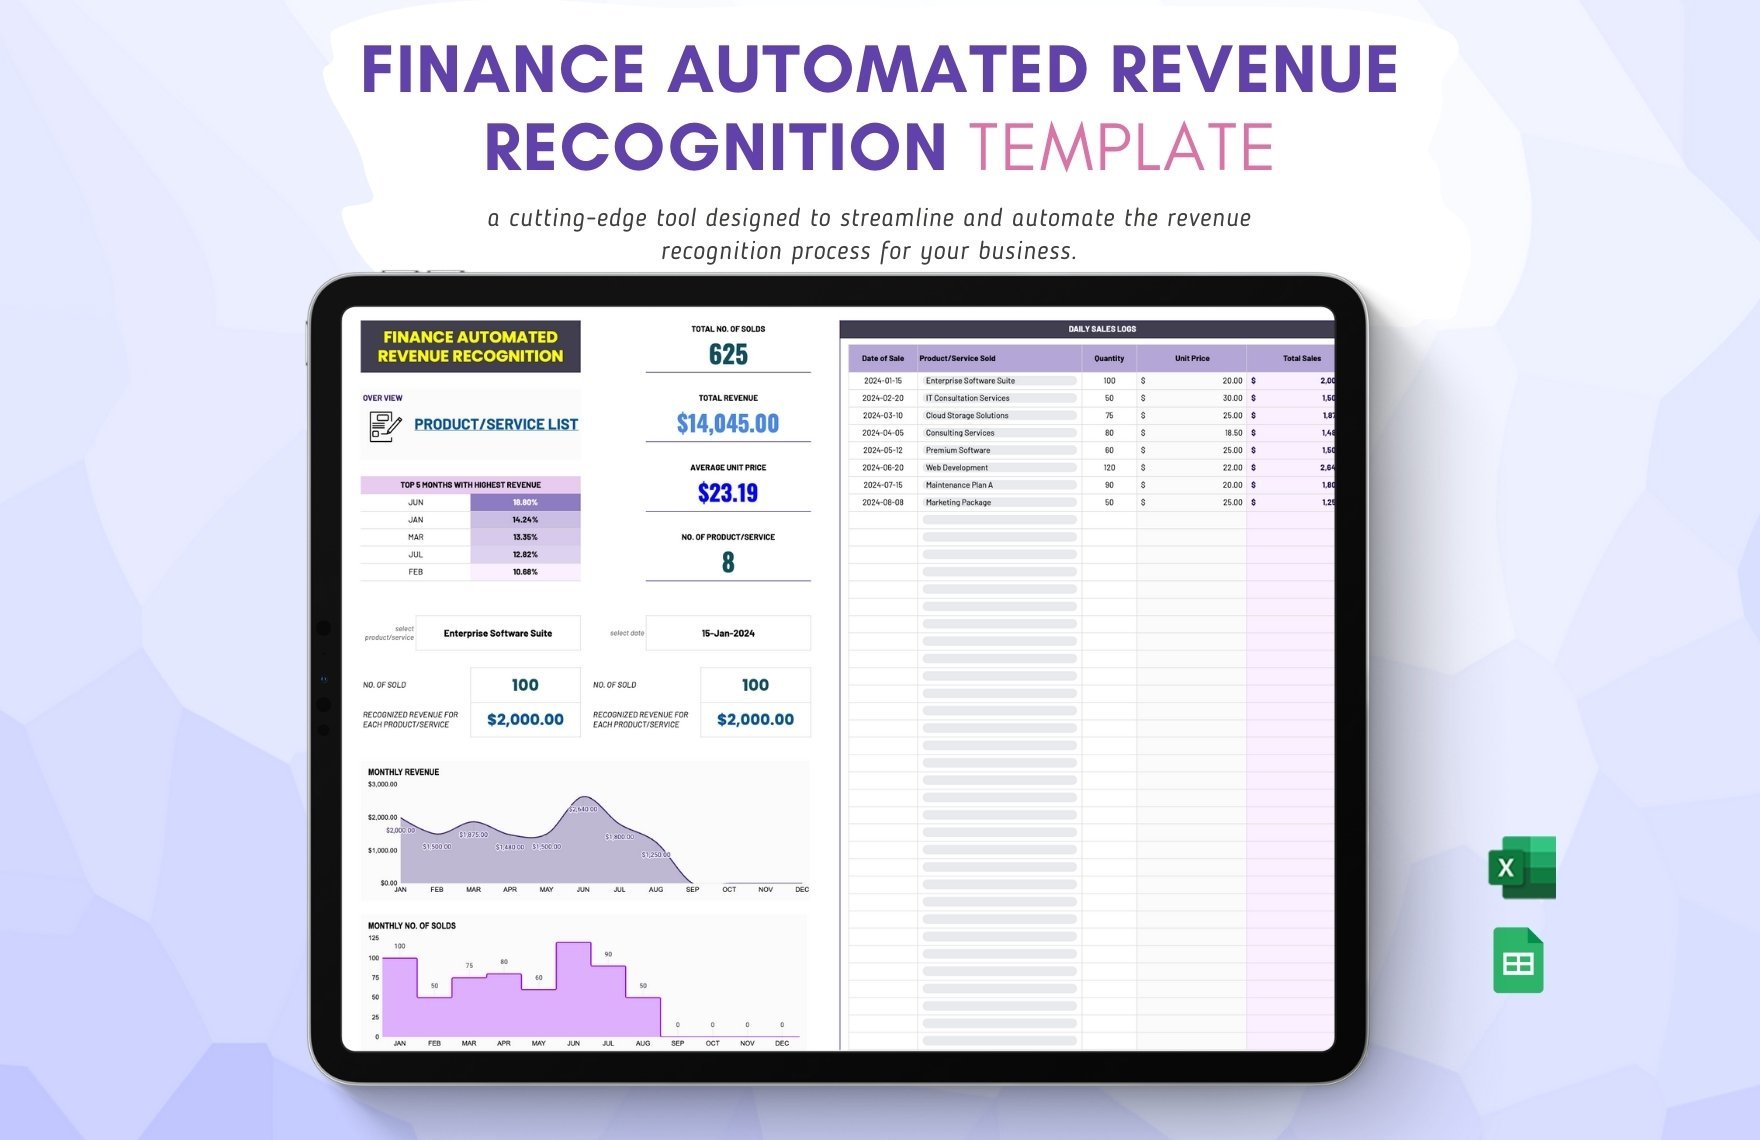 Finance Automated Revenue Recognition Template